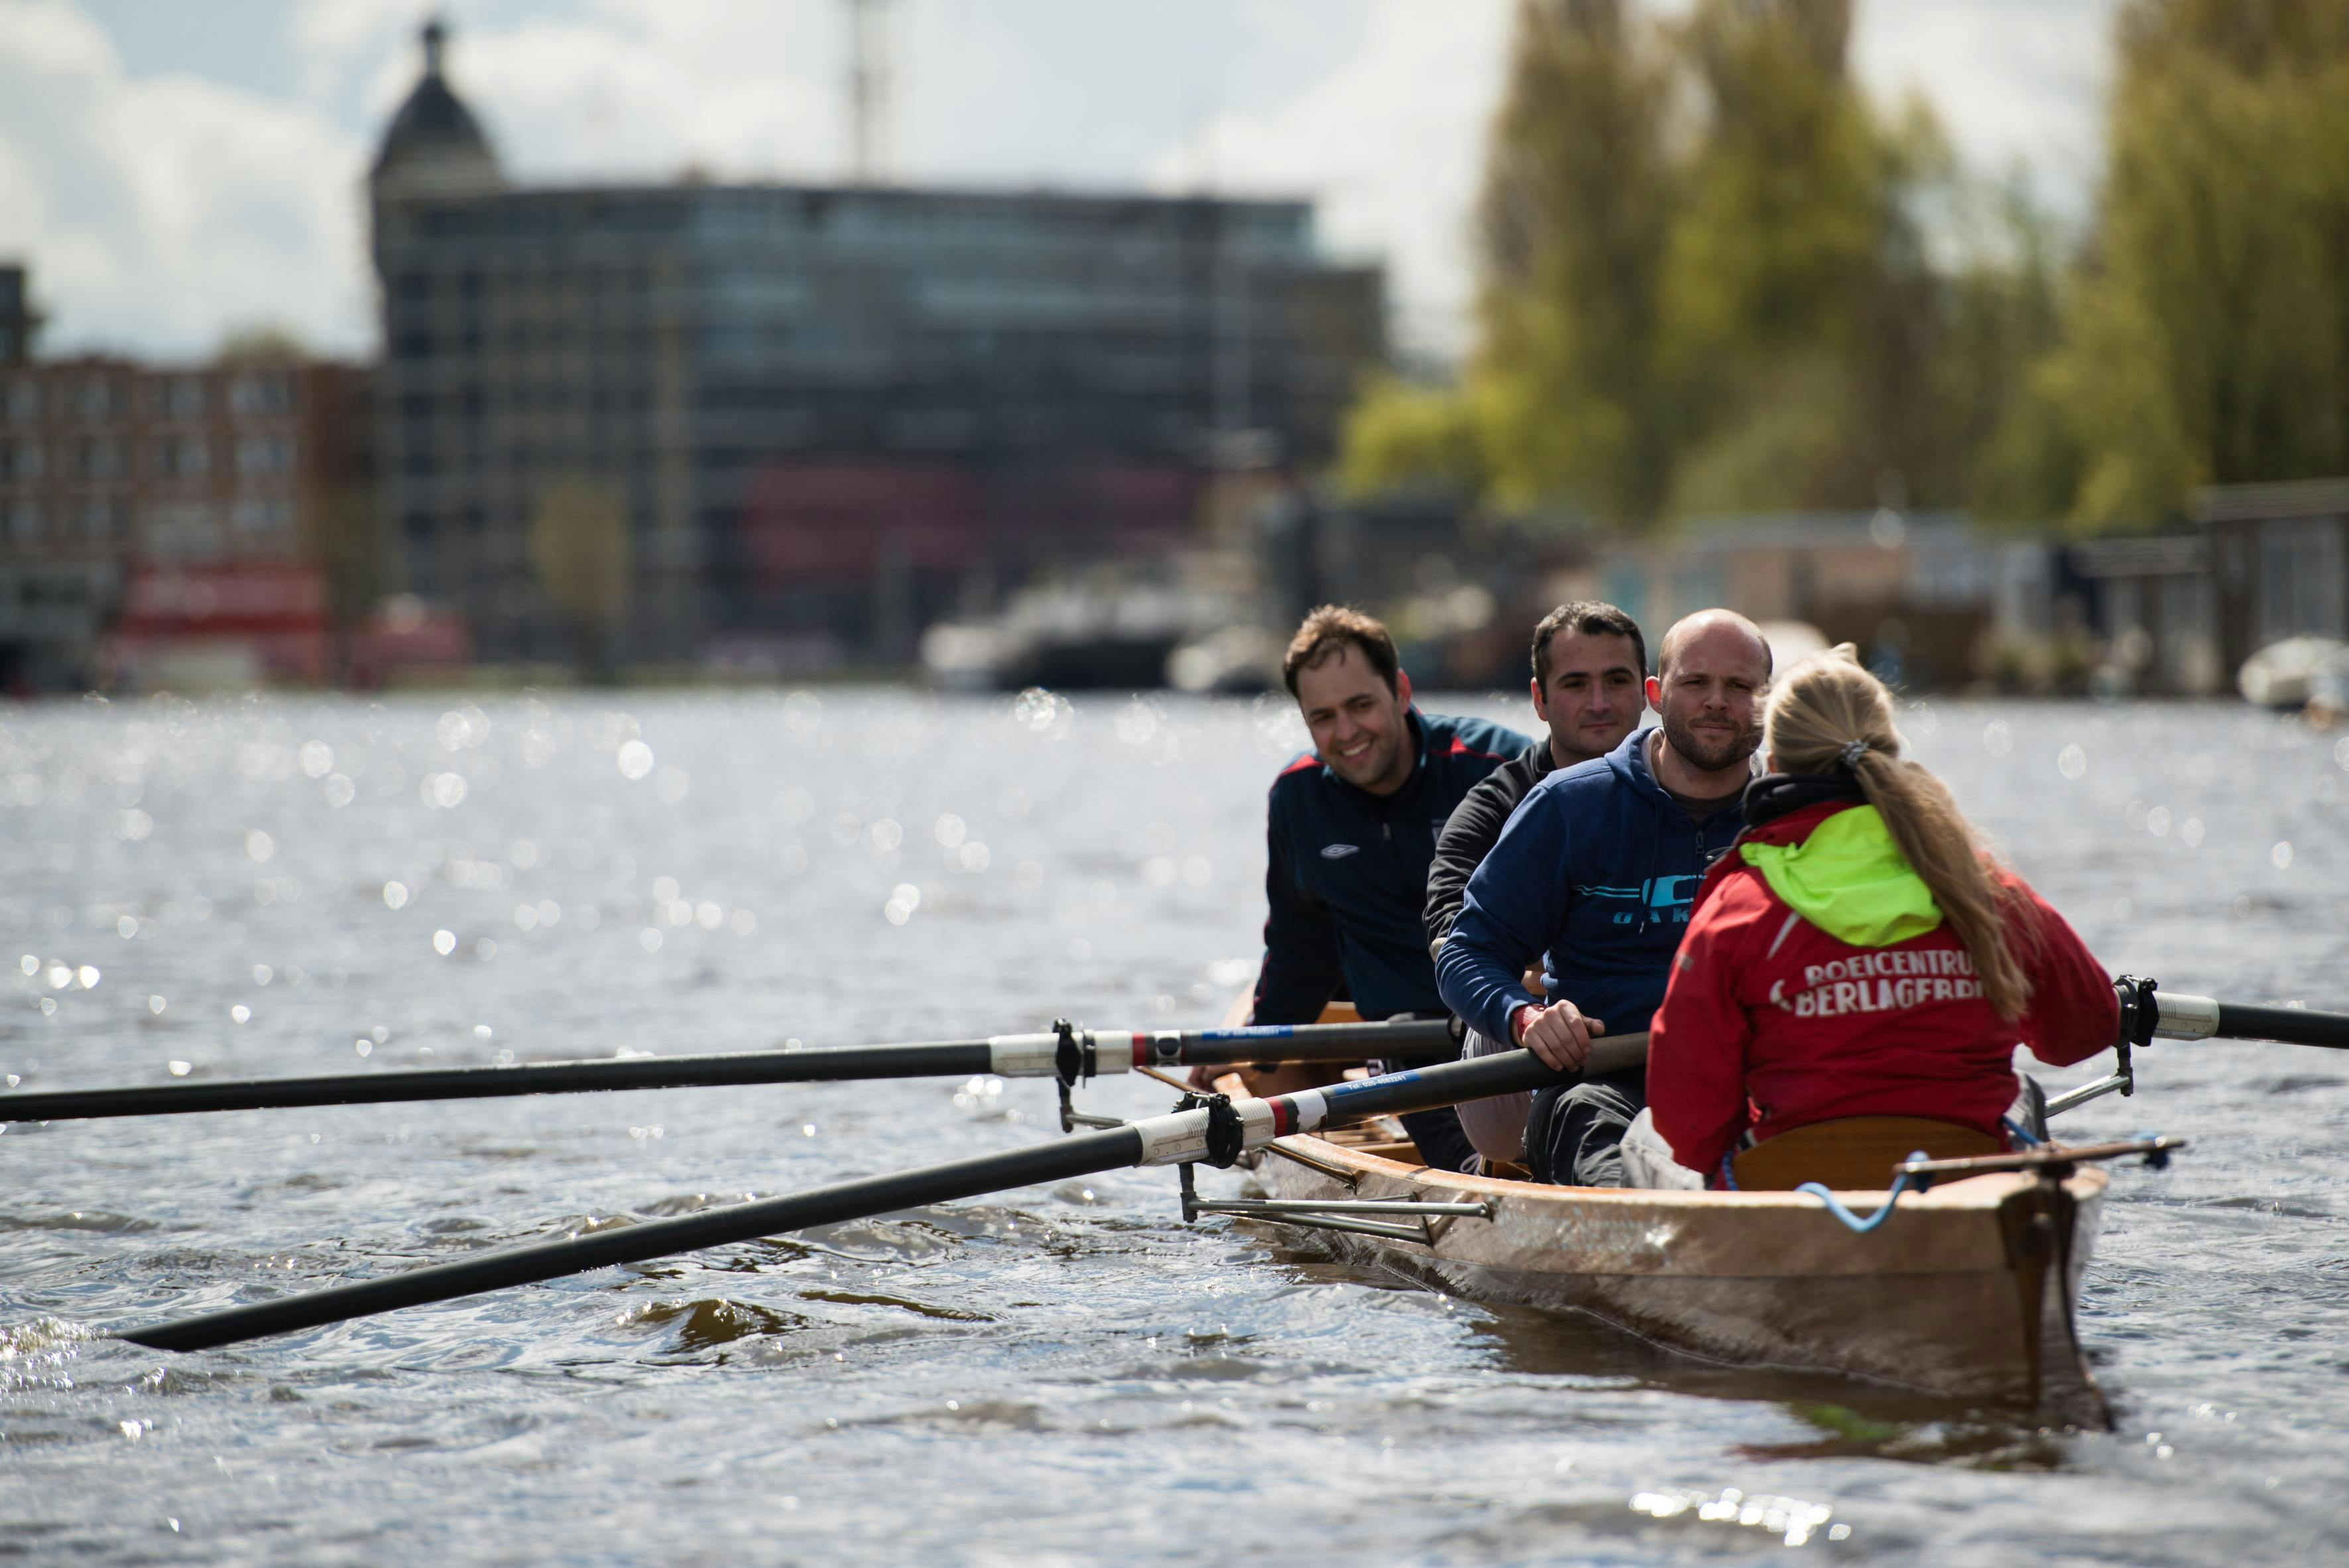 Rowing clinic: Amsterdam from the water (18+)